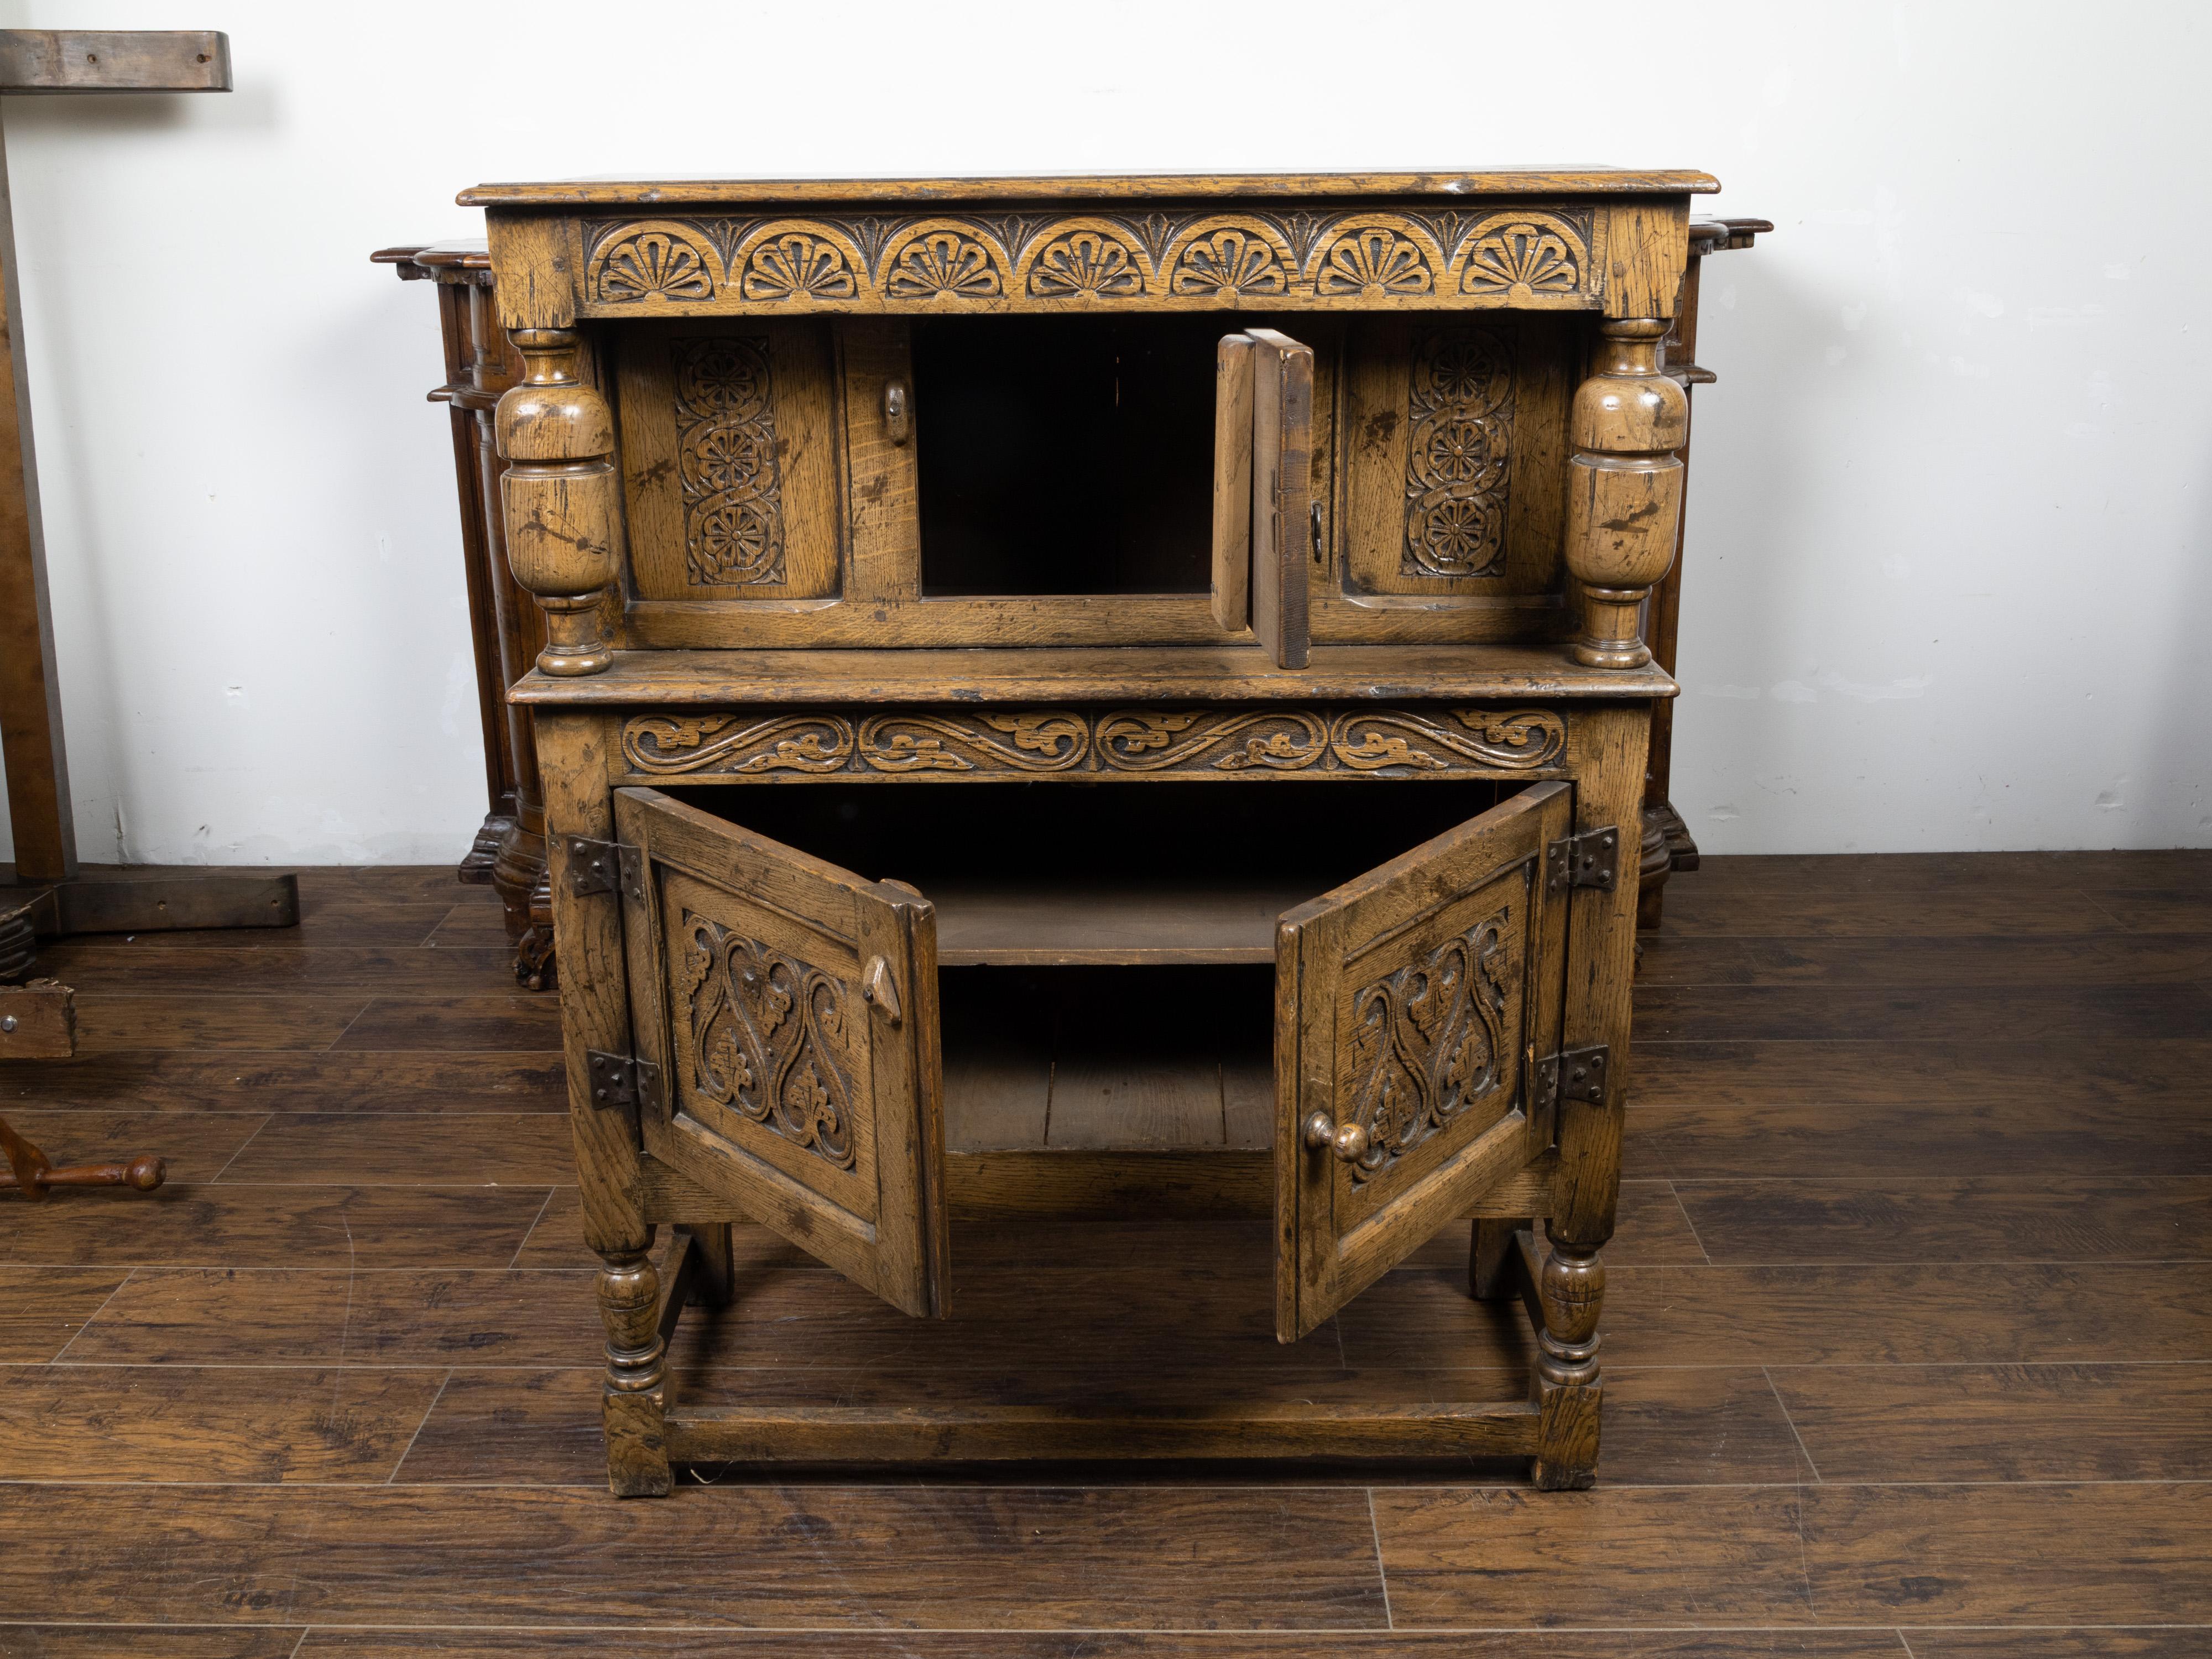 An Italian oak cupboard from the 19th century, with carved foliage and flowers. Created in Italy during the 19th century, this oak cupboard features a rectangular top sitting above an apron adorned with carved flowers. A single recessed door below,